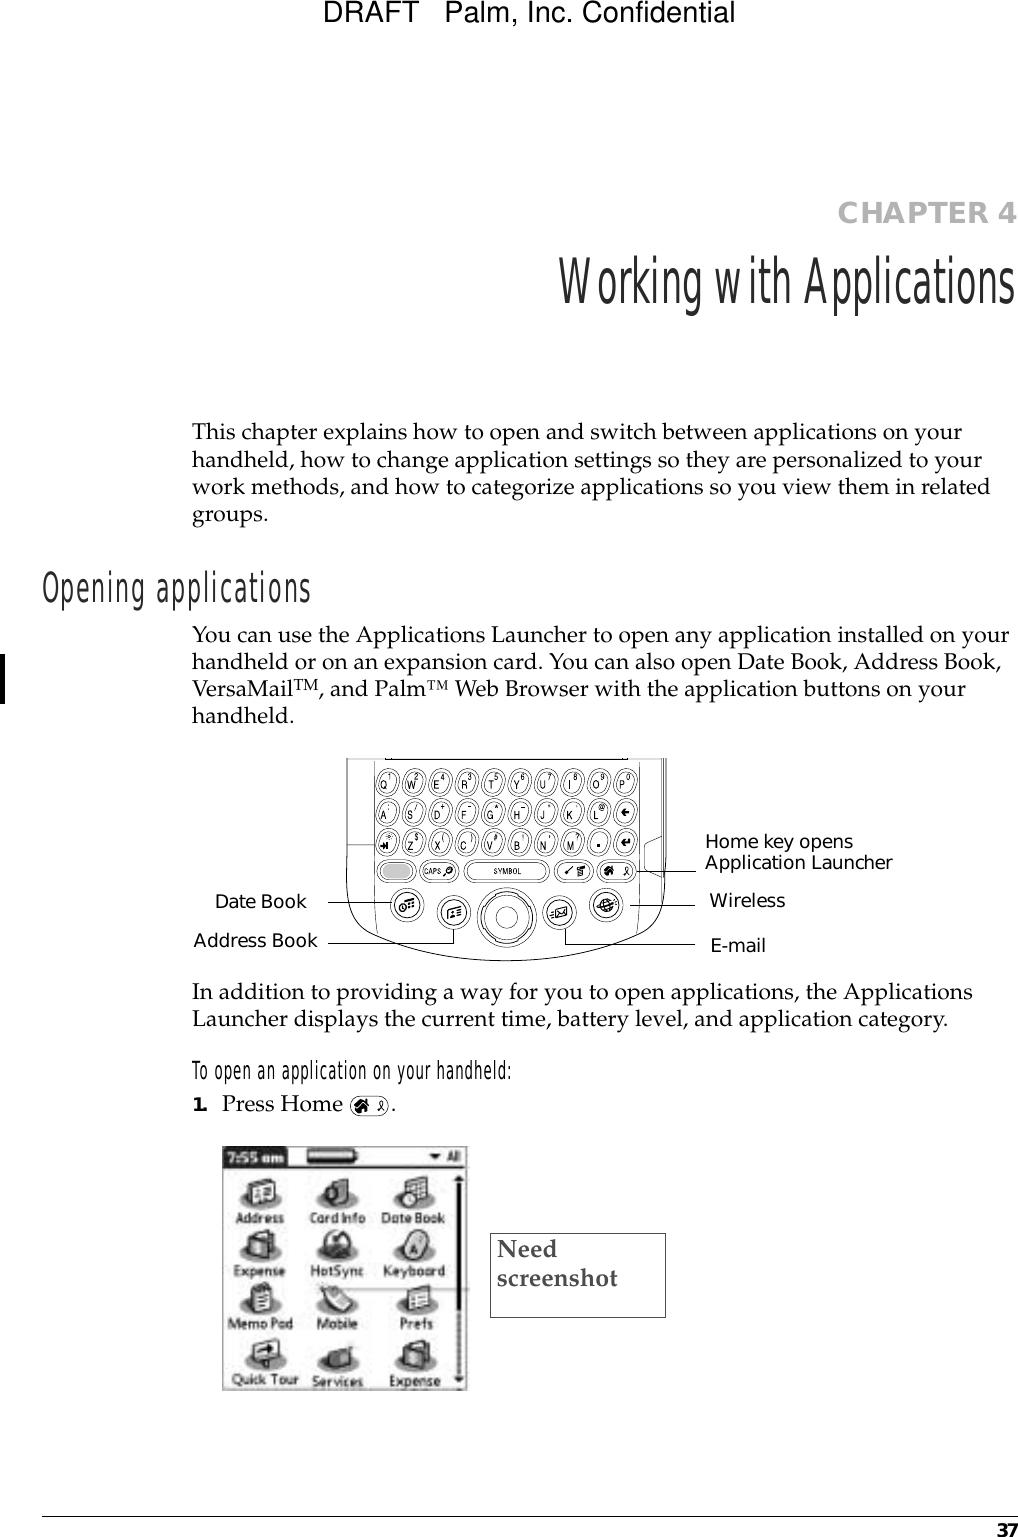 37CHAPTER 4Working with ApplicationsThis chapter explains how to open and switch between applications on your handheld, how to change application settings so they are personalized to your work methods, and how to categorize applications so you view them in related groups.Opening applicationsYou can use the Applications Launcher to open any application installed on your handheld or on an expansion card. You can also open Date Book, Address Book, VersaMailTM, and Palm™ Web Browser with the application buttons on your handheld.In addition to providing a way for you to open applications, the Applications Launcher displays the current time, battery level, and application category. To open an application on your handheld:1. Press Home  . Home key opens Application LauncherAddress BookDate BookE-mailWirelessNeed screenshotDRAFT   Palm, Inc. Confidential